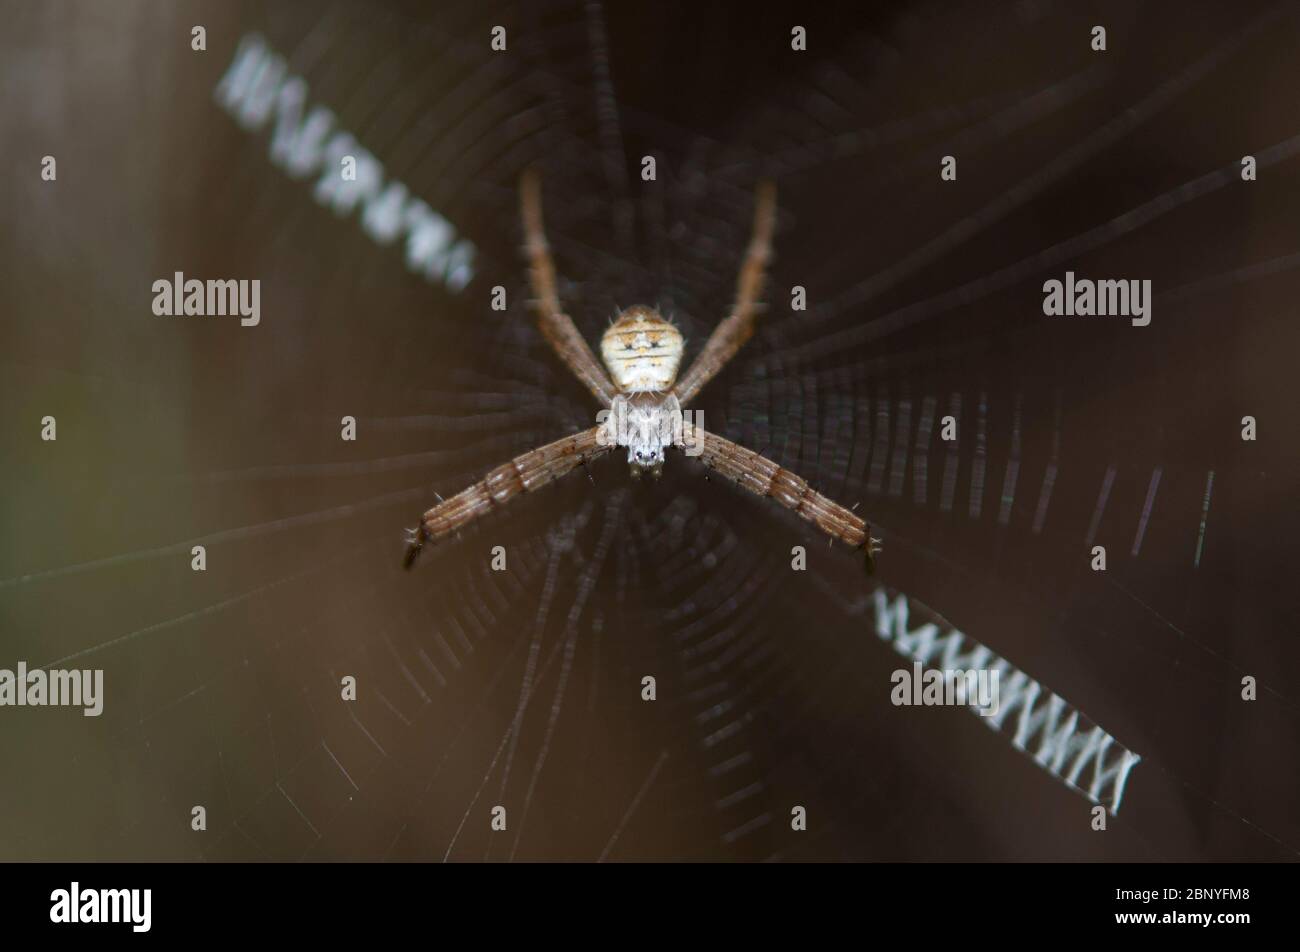 Orb-Weaver Spider, Argiope sp, with lace-like patterned web stabilimentum, Klungkung, Bali, Indonesia Stock Photo